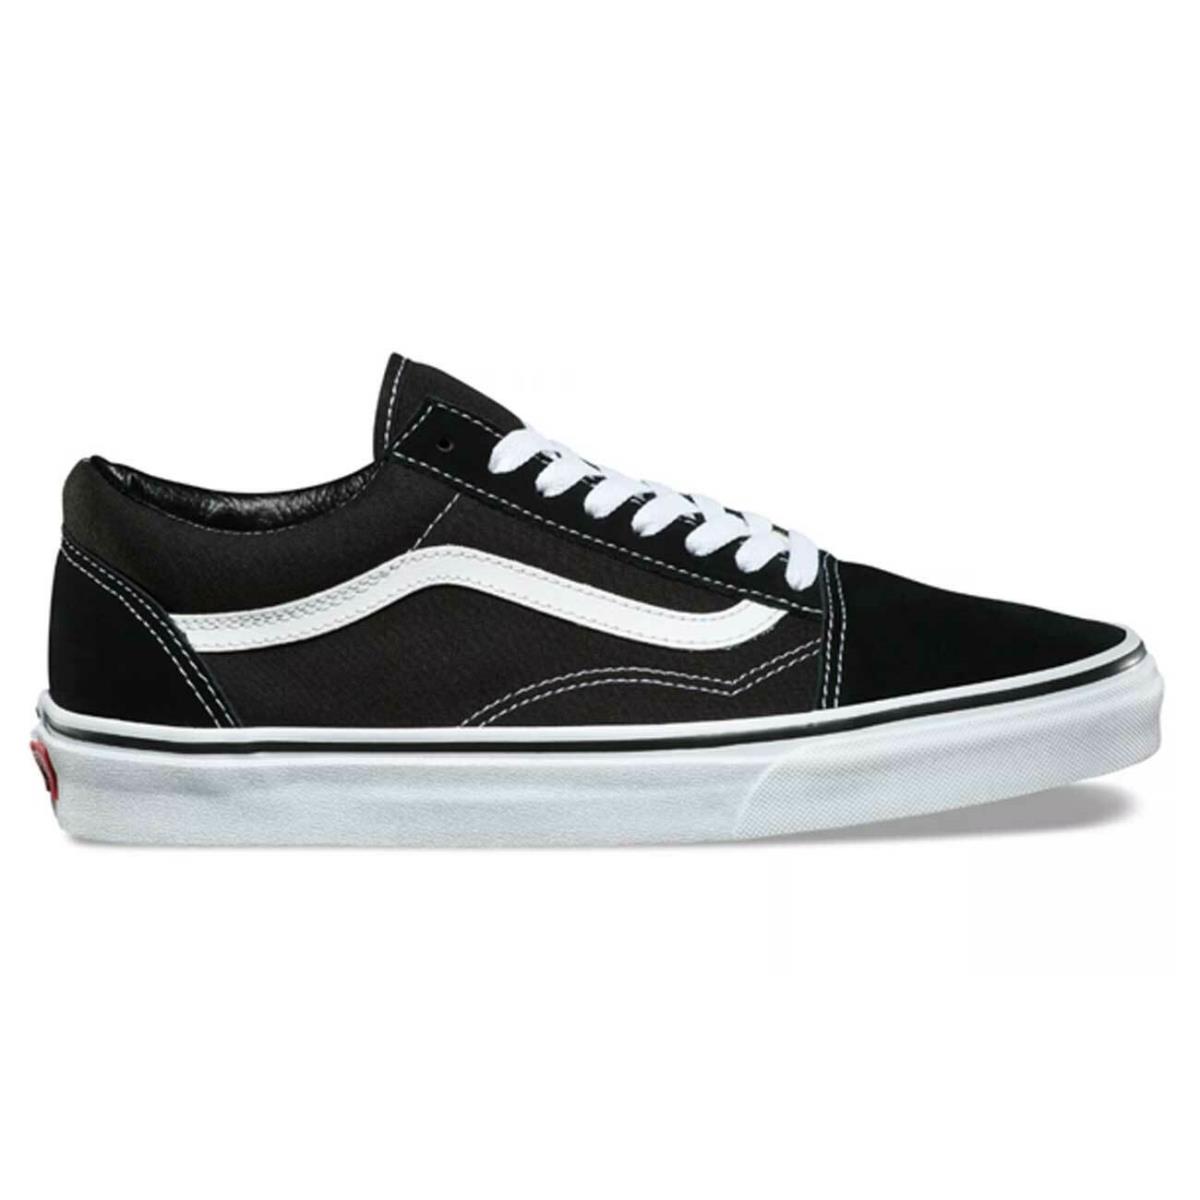 Vans Old Skool Classic VN000D3HY28 Unisex Black and White Casual Shoes - Black